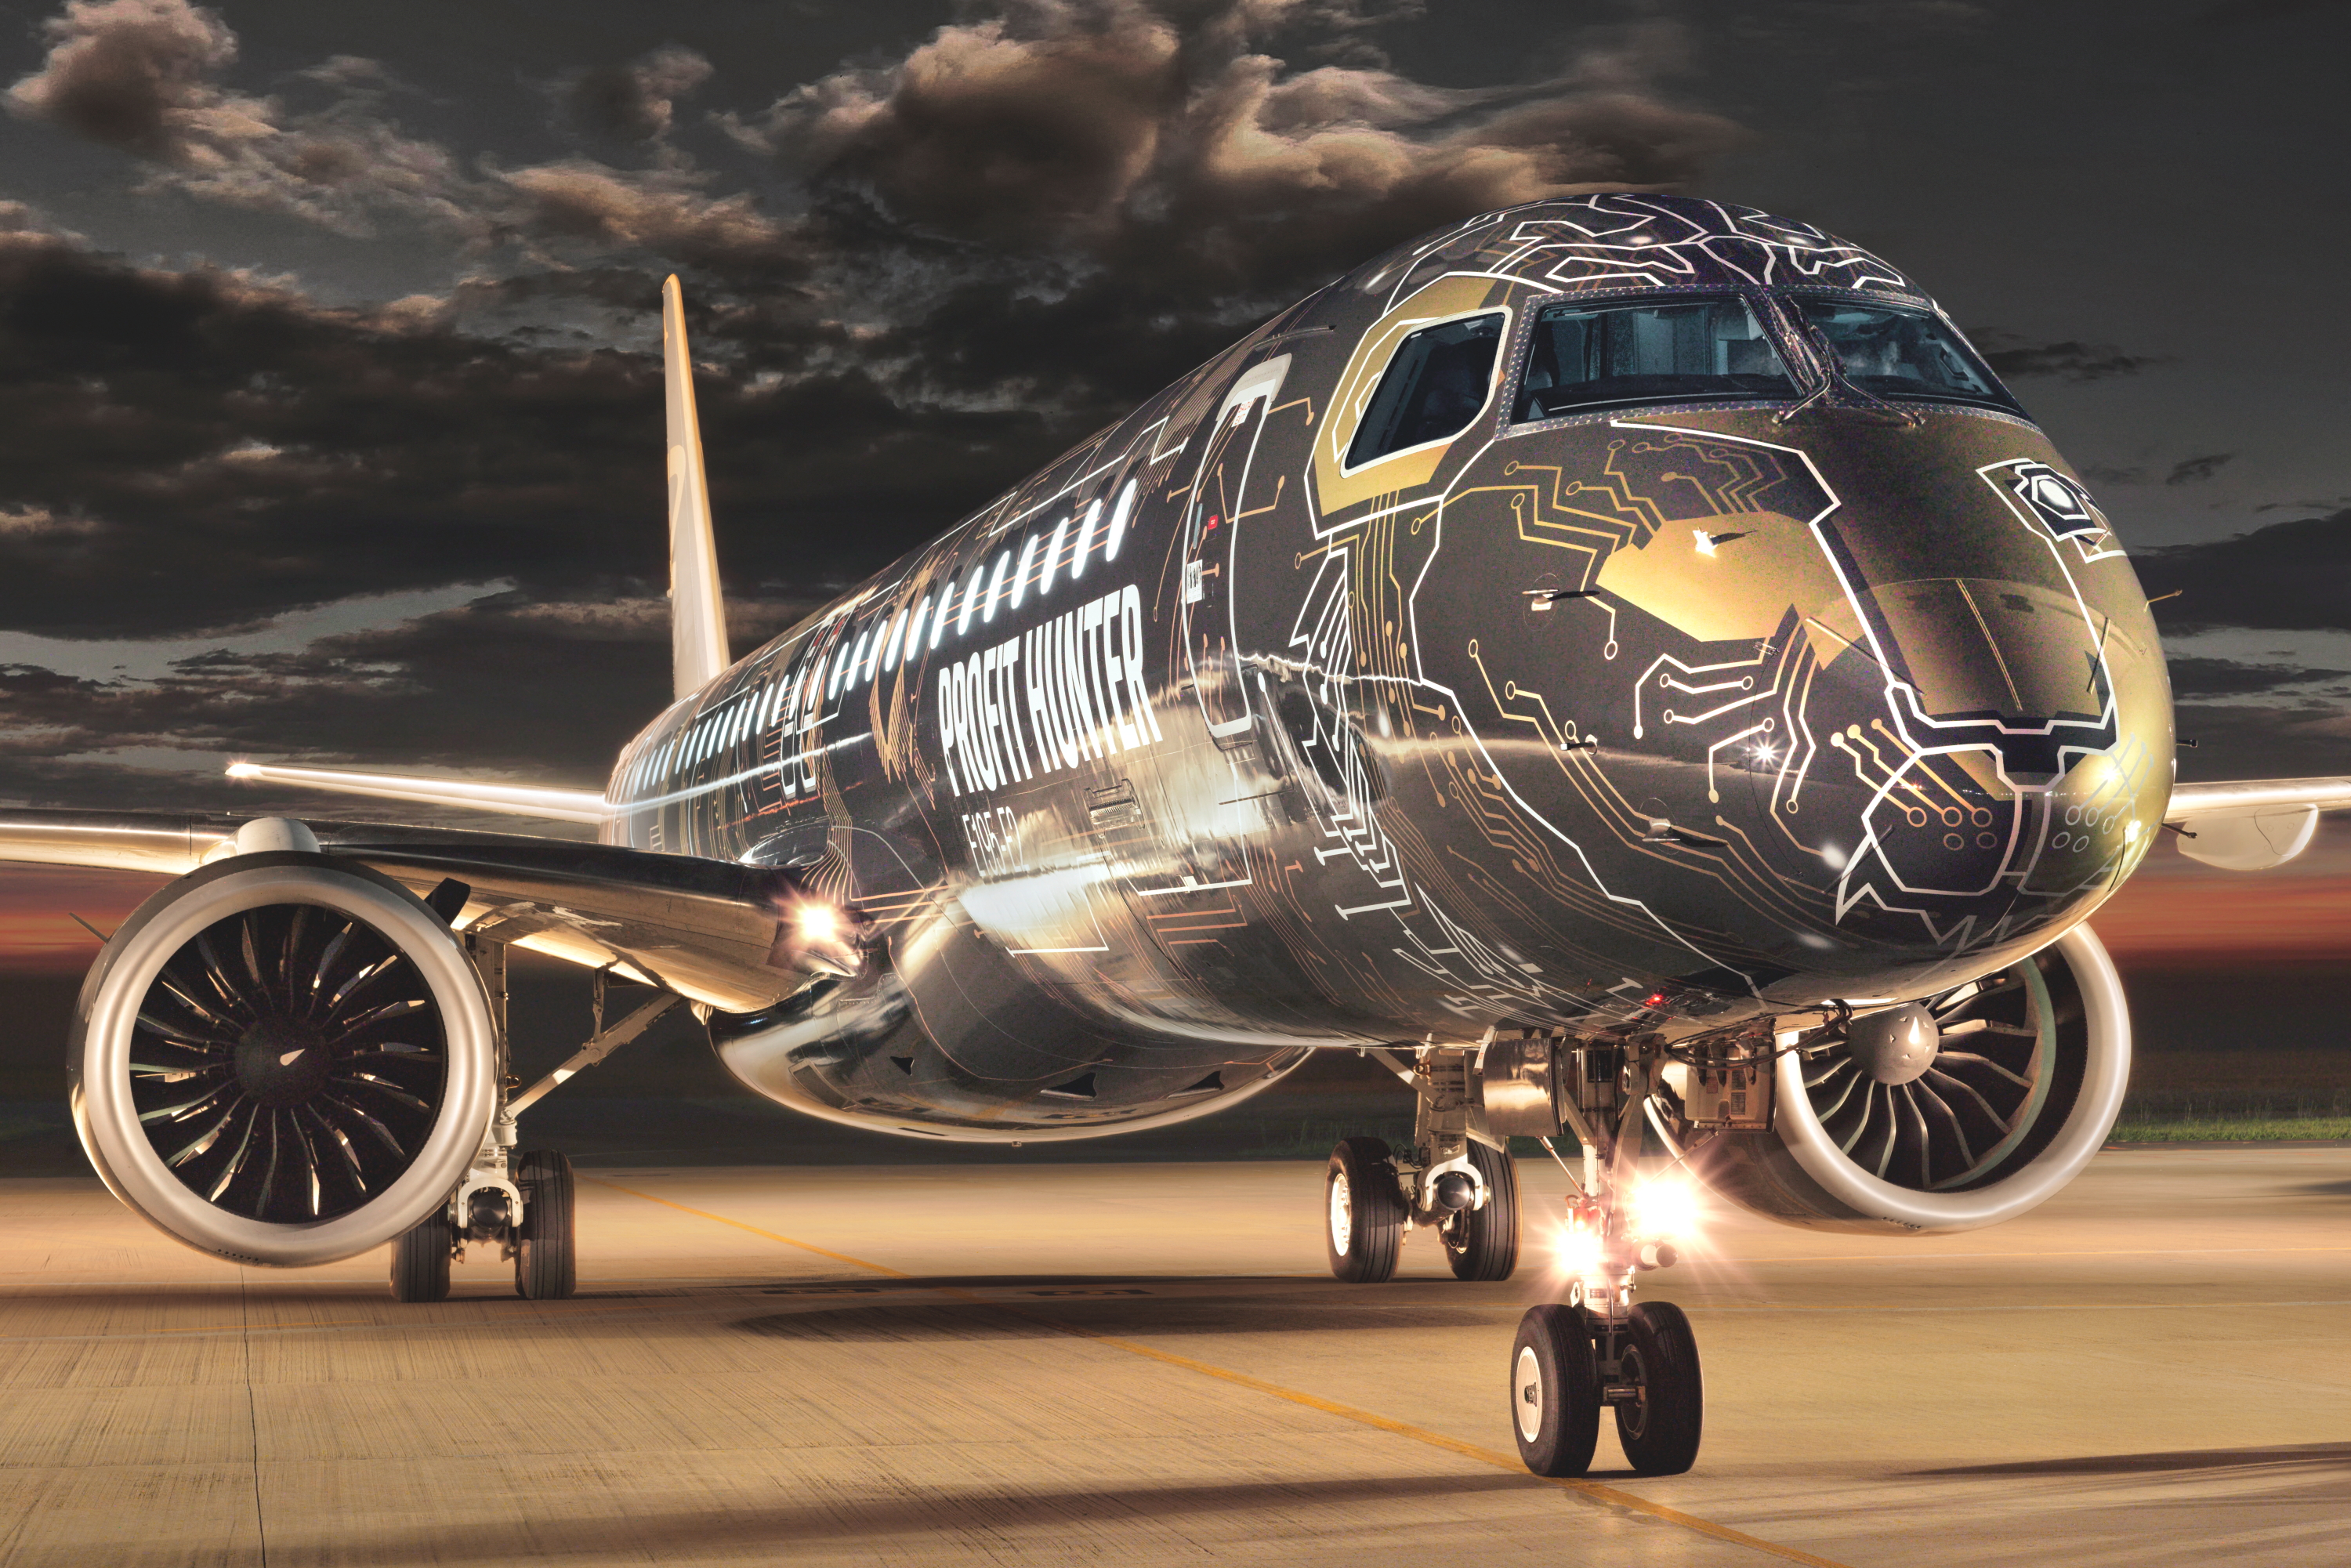 Embraer’s newest Profit Hunter, an E195-E2 showcasing a stunning “TechLion” livery that covers the entire aircraft’s fuselage, has embarked on a global demo tour. The first stop took place today in Xiamen, China, and will be followed by several stops within China and Asia Pacific during the months of July and August. The E195-E2 is the largest of the three aircraft in the E-Jets E2 family. Click to enlarge.